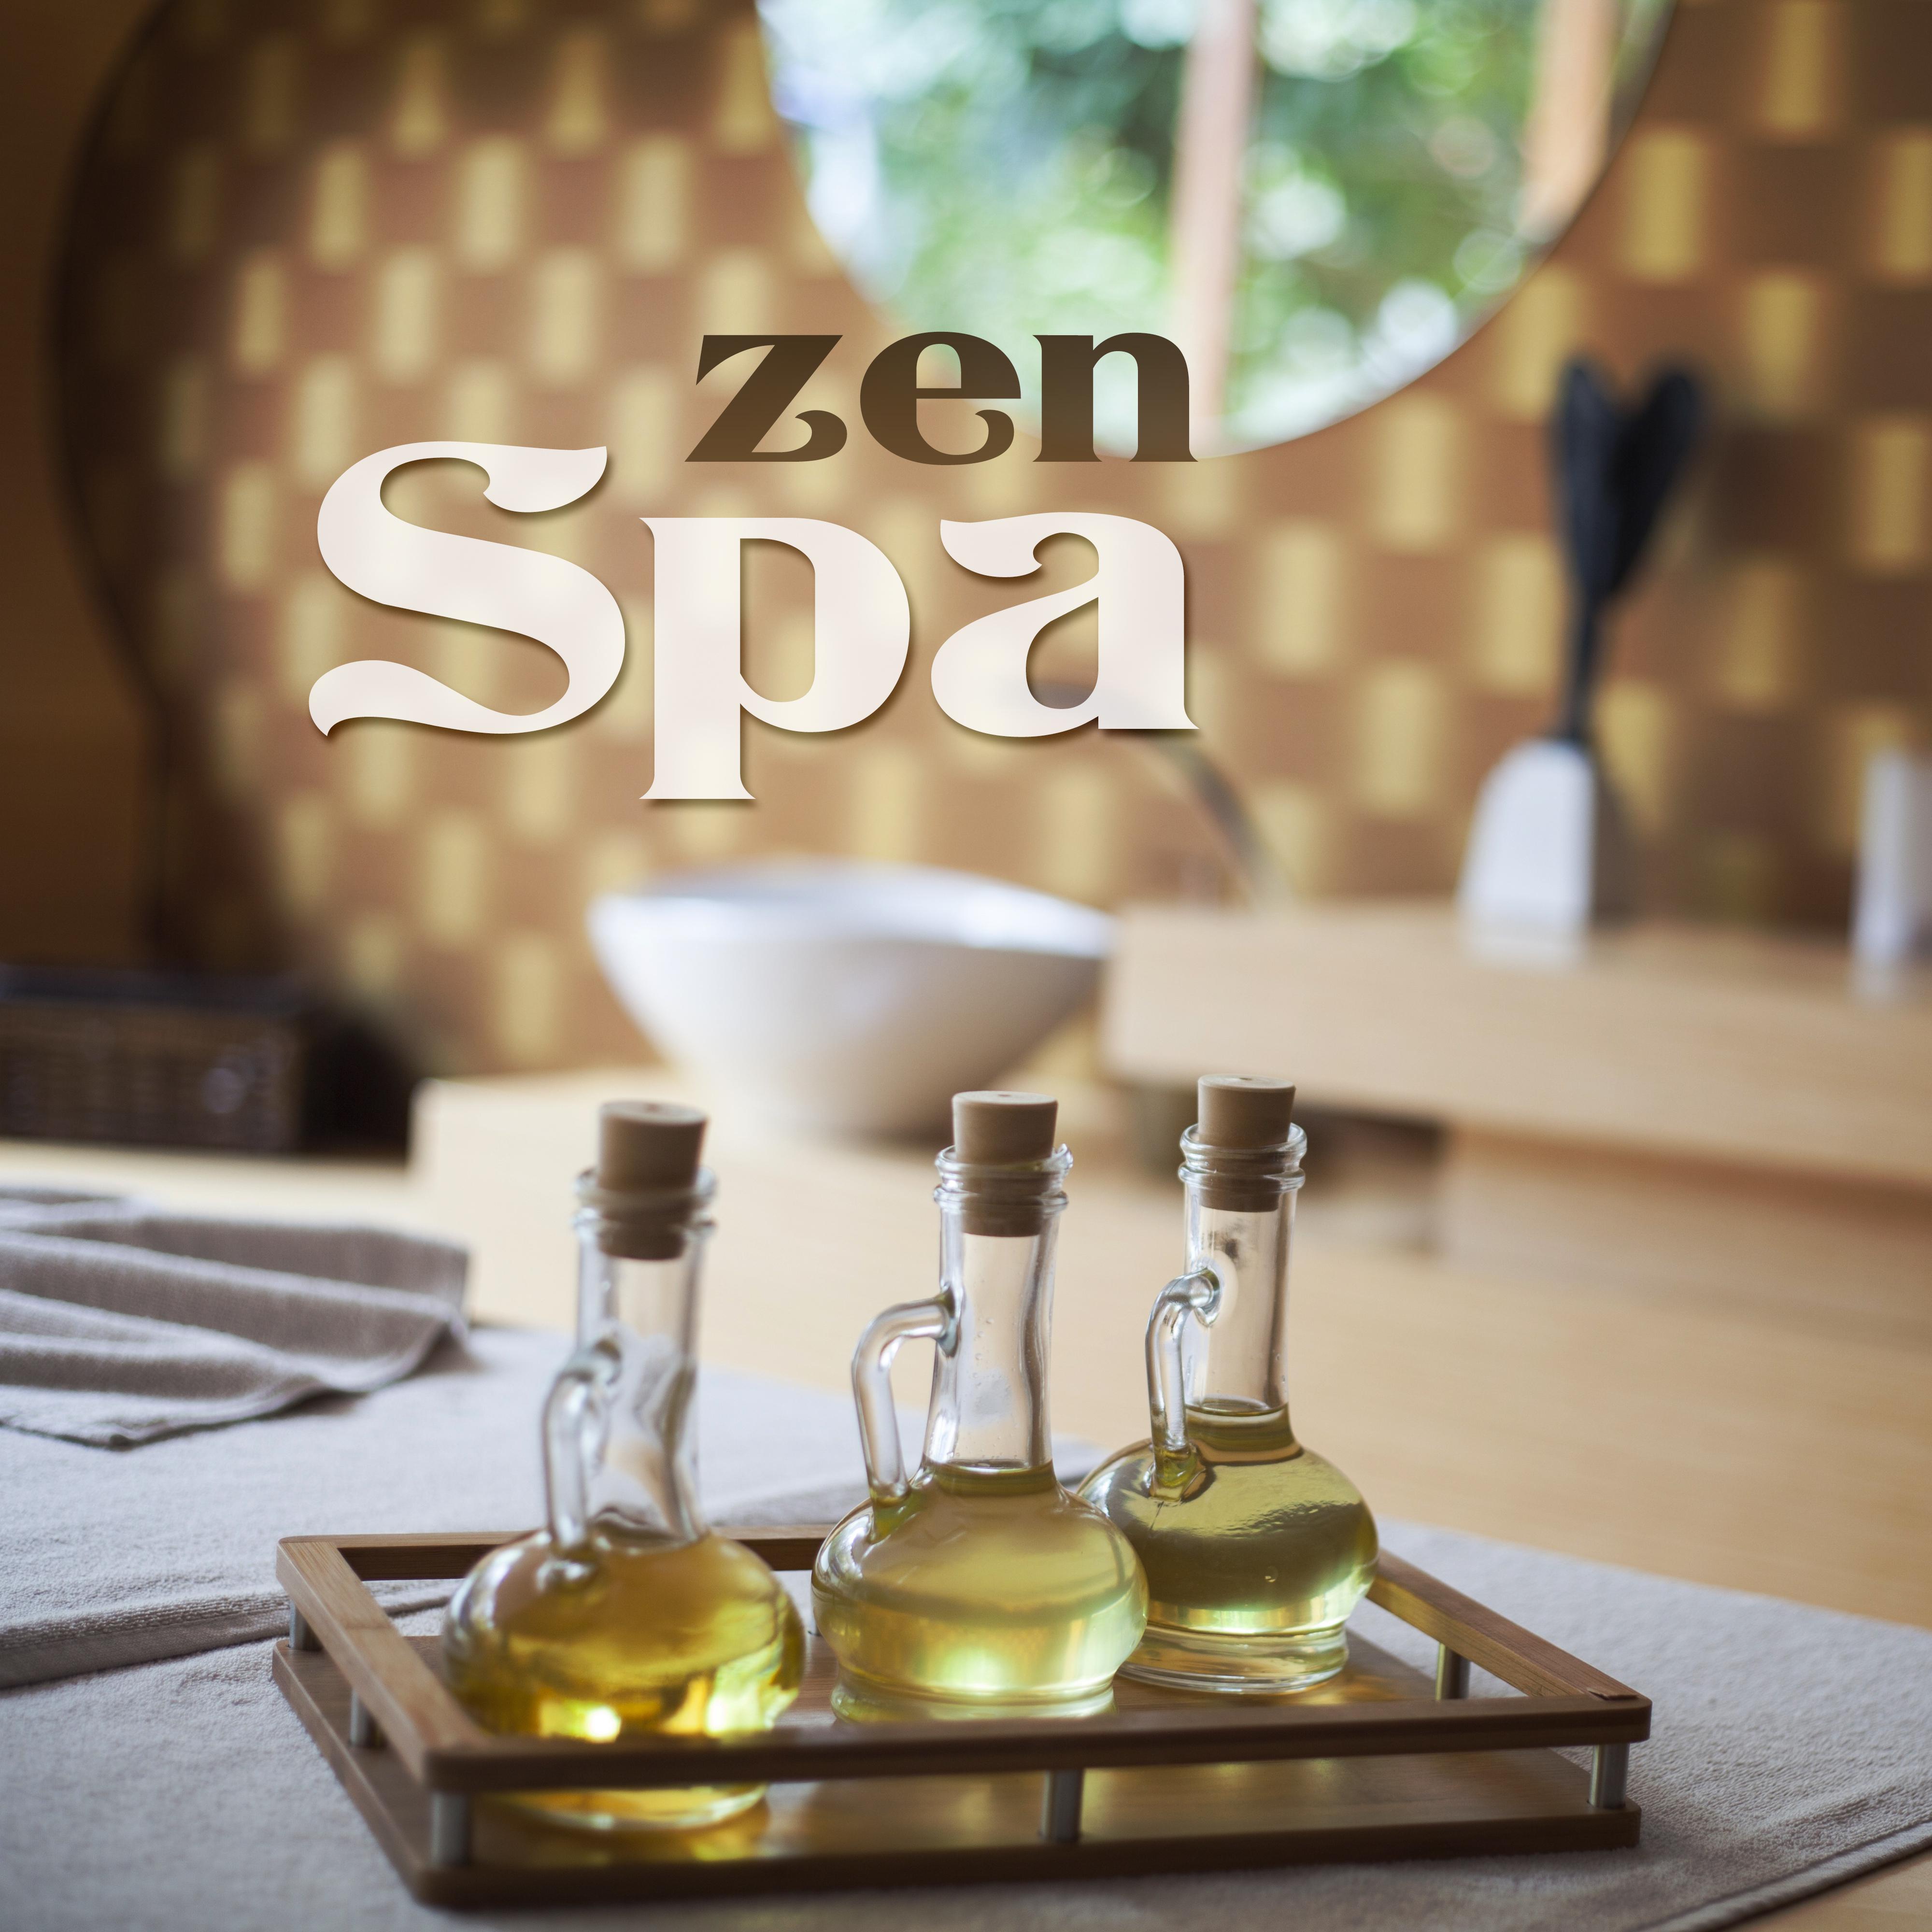 Zen Spa – Therapy Sounds, Music for Healing, Beauty, Massage Music, Relaxation, Wellness, Bliss Spa